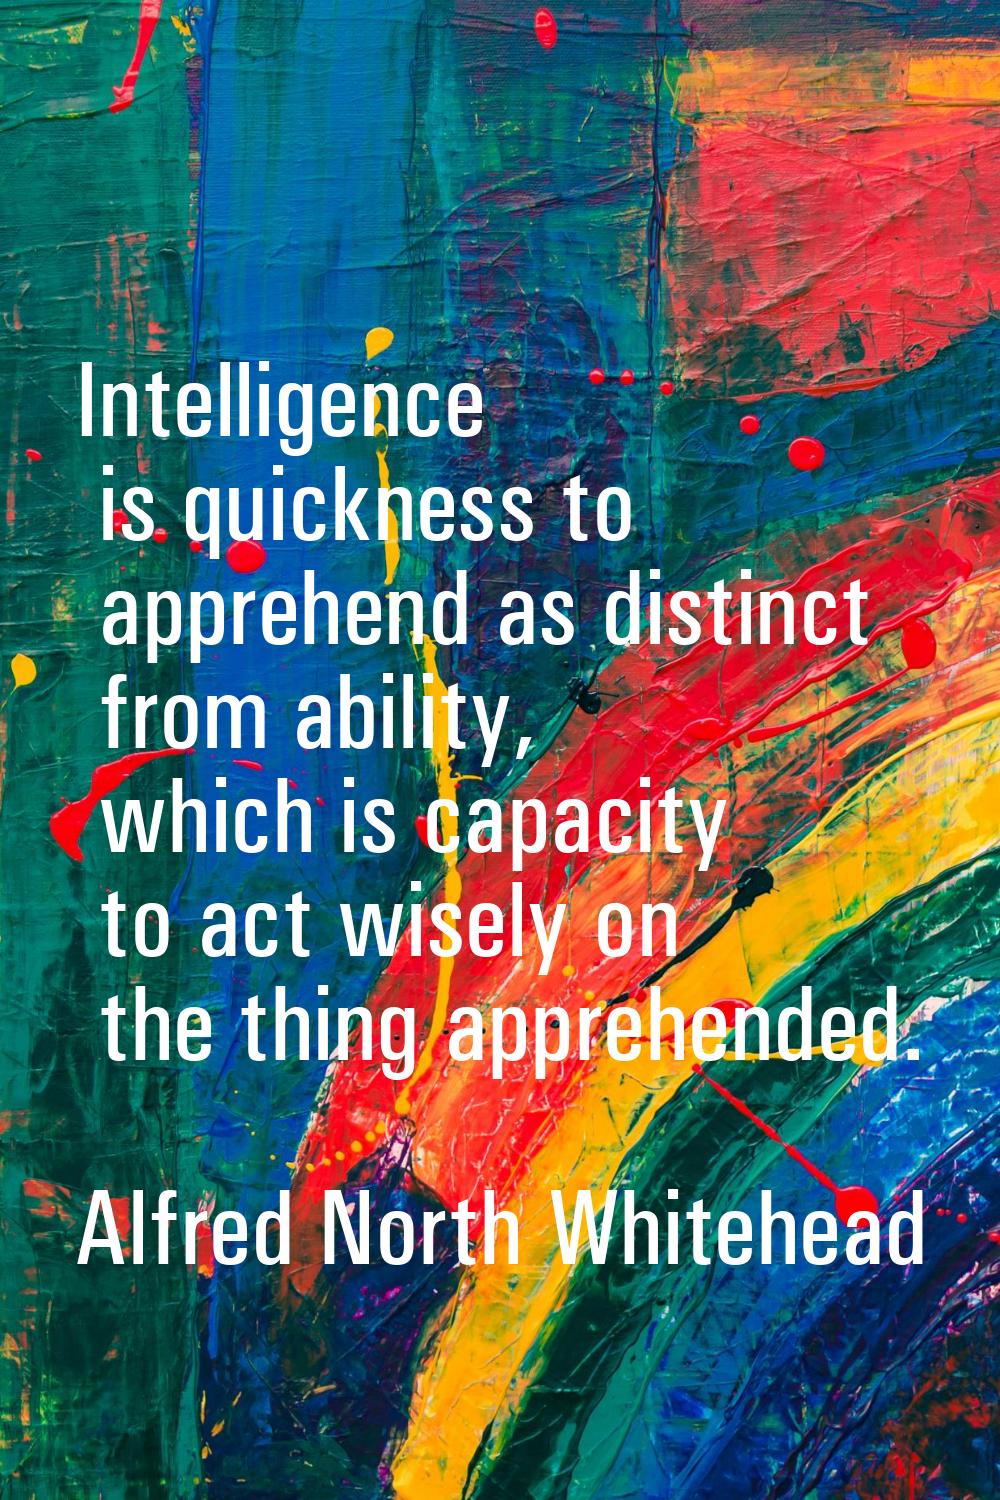 Intelligence is quickness to apprehend as distinct from ability, which is capacity to act wisely on